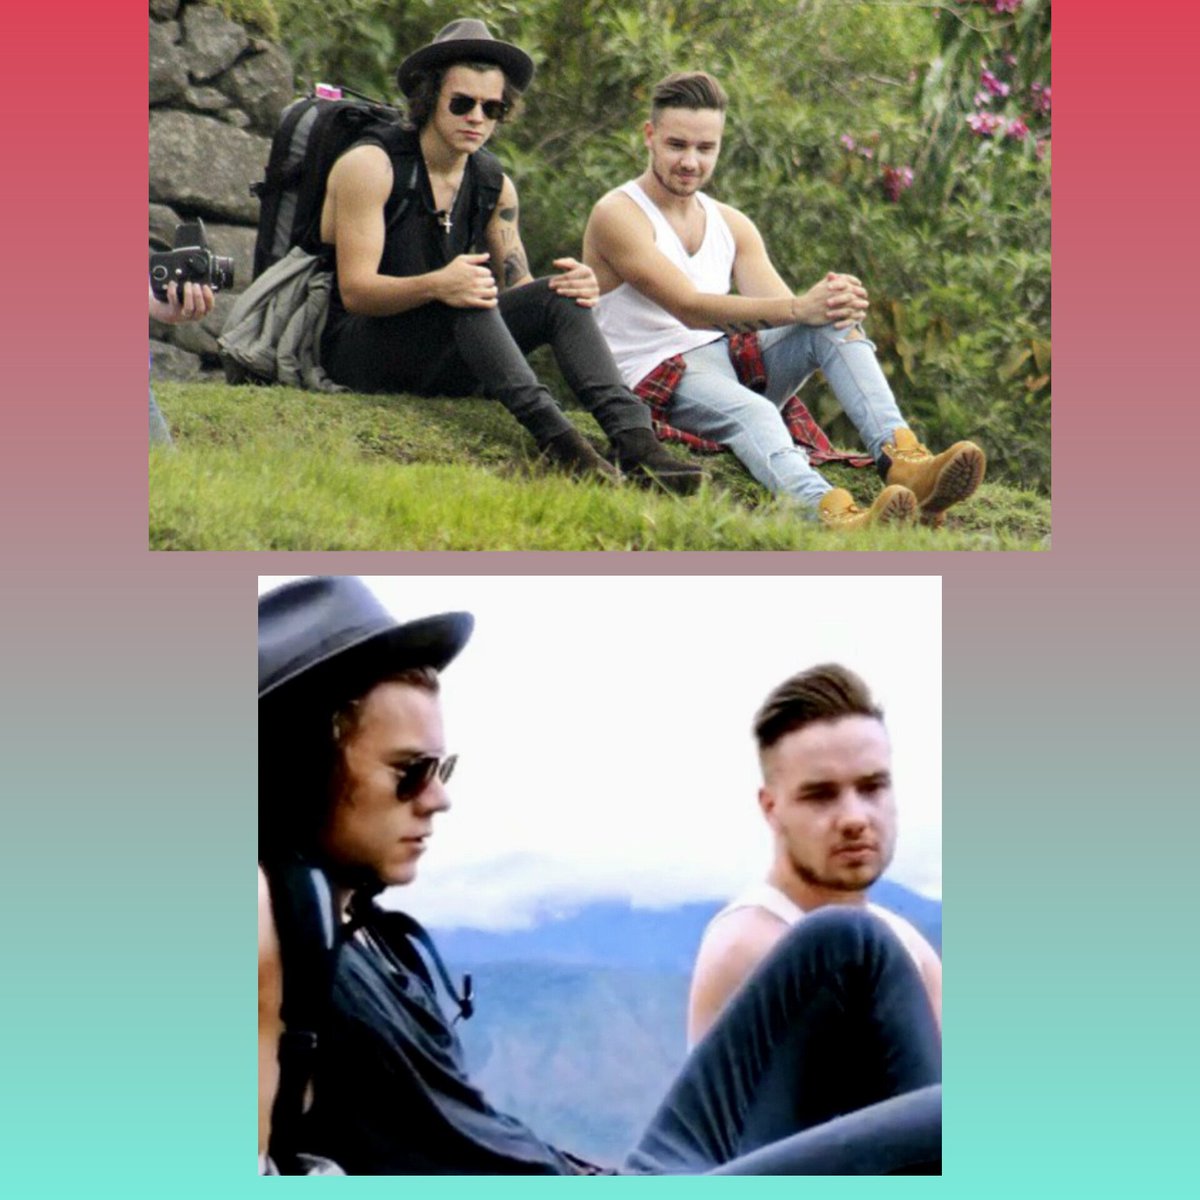 10 yrs ago today Liam posted these photos to his IG from the trip with Harry to Machu Pichu while the 1D boys were in Peru
#LiamHarry #LiamPayne #HarryStyles #Lima2014 #memorable